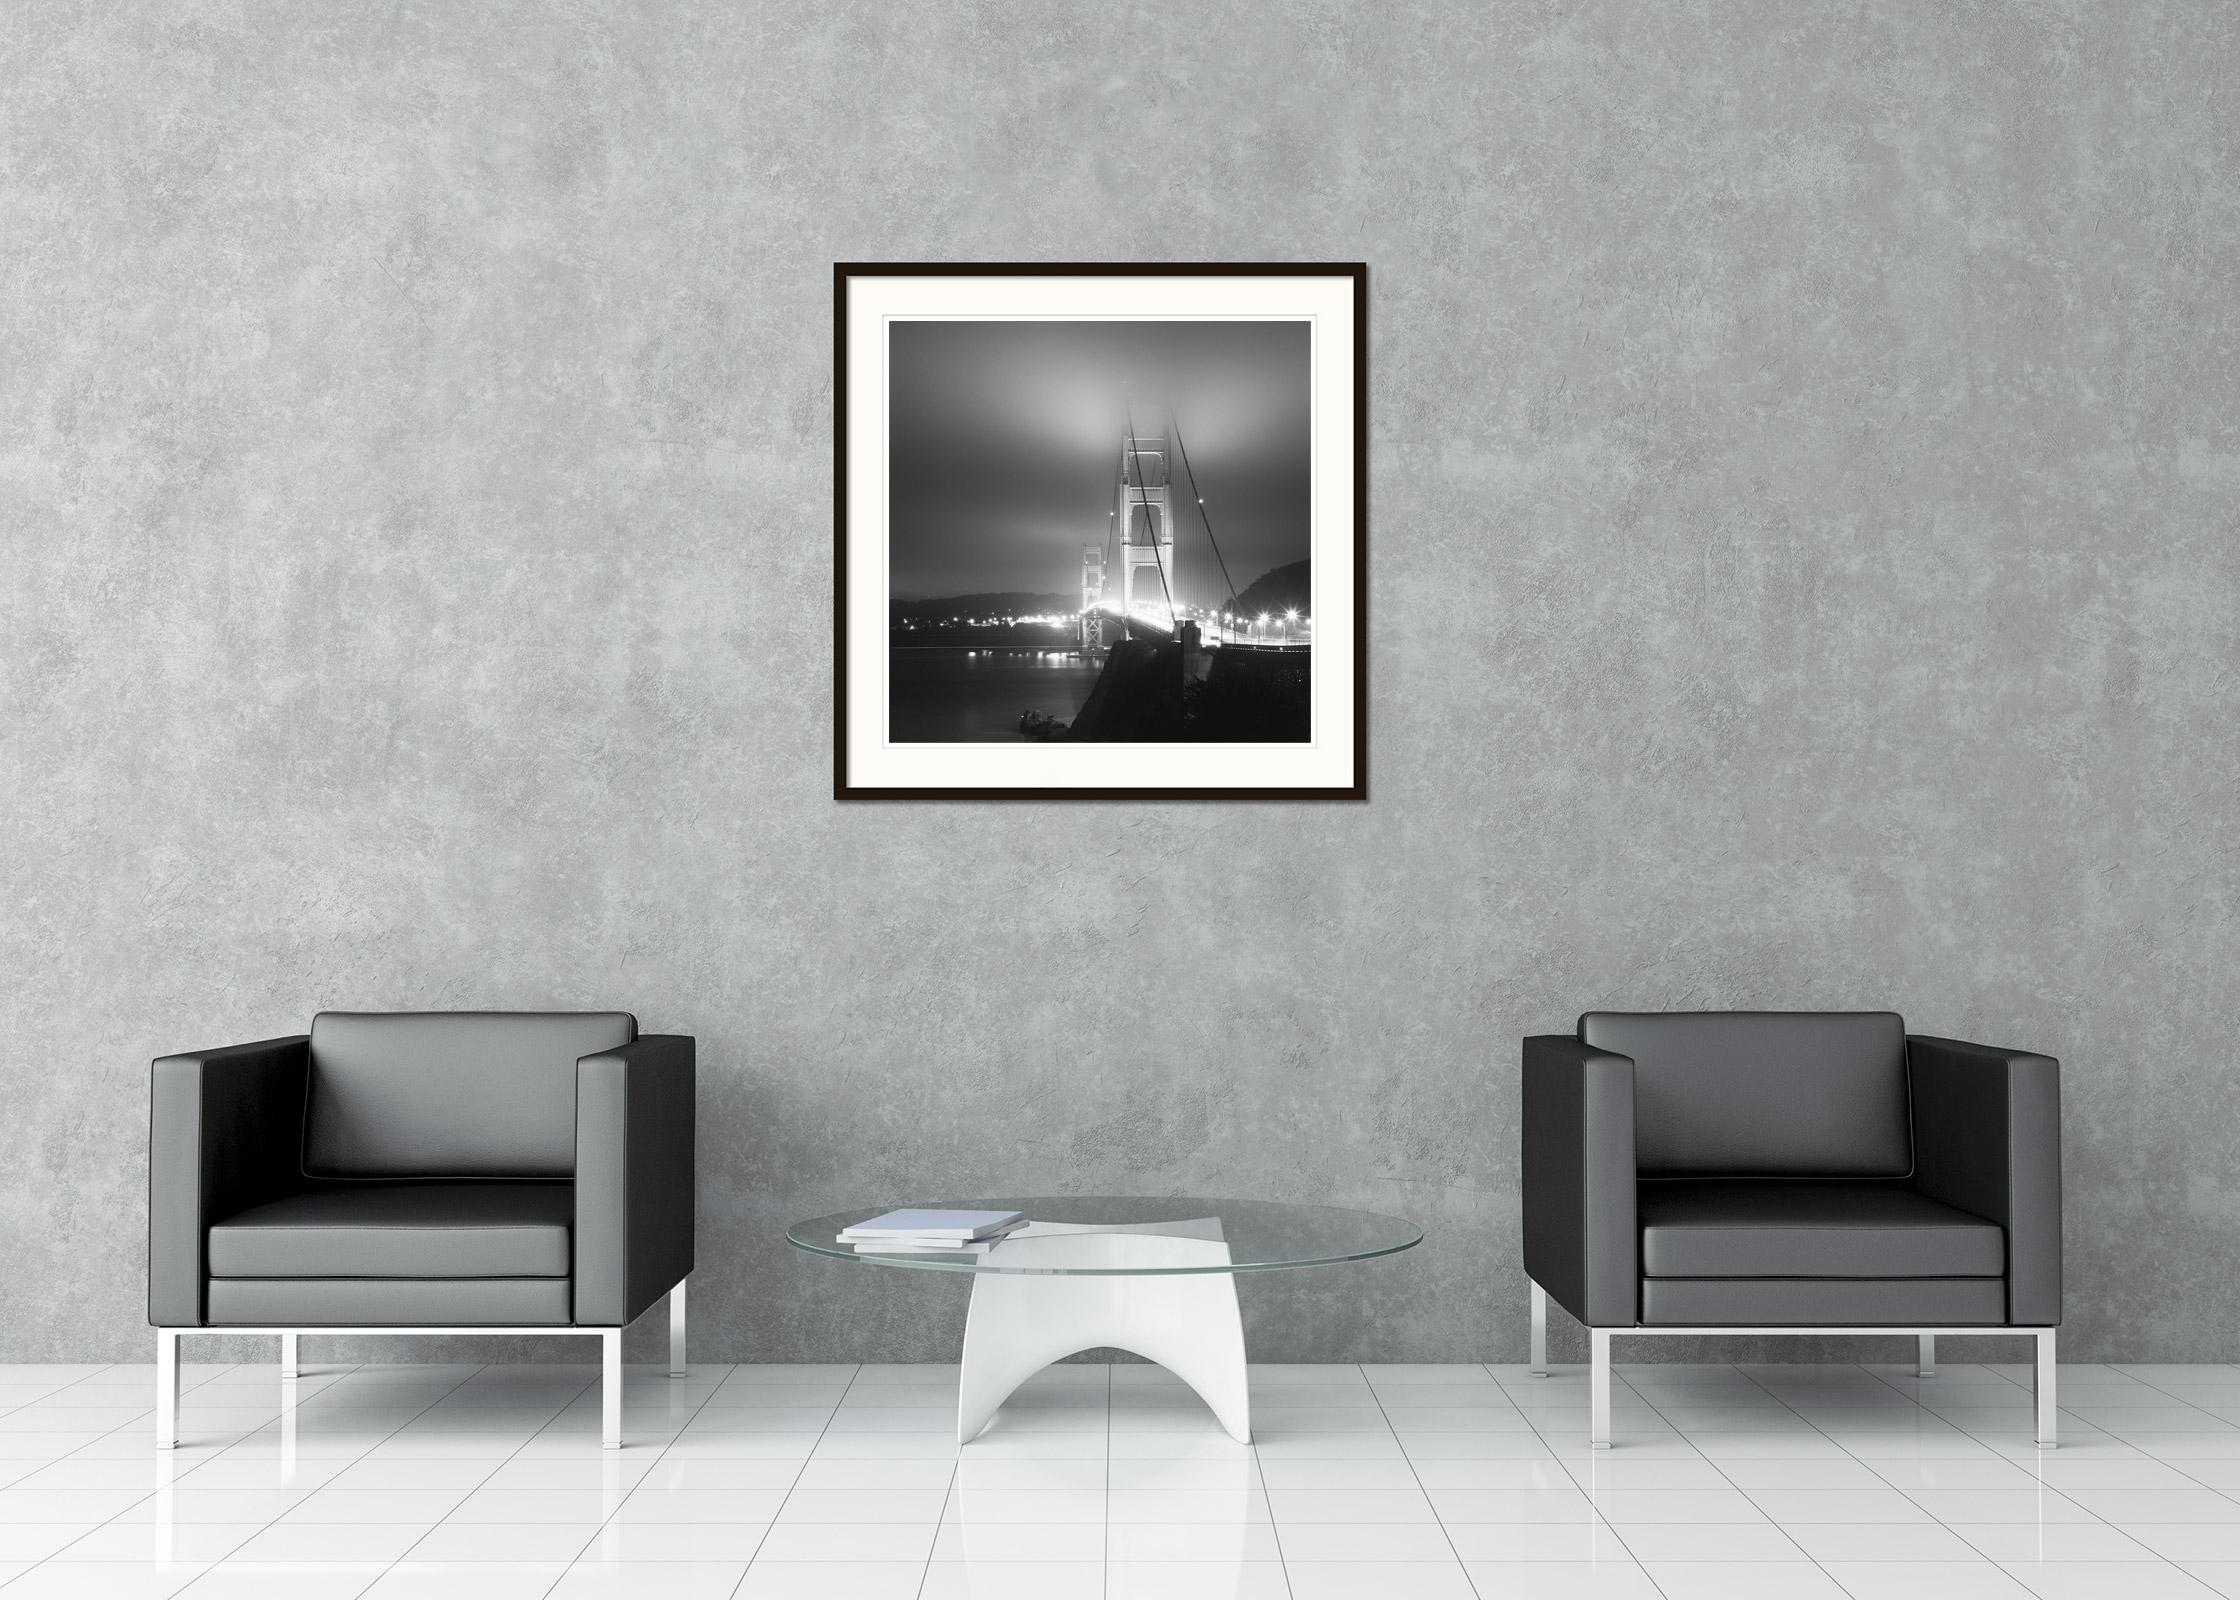 Black and white fine art long exposure waterscape - landscape - night photography. Golden gate bridge at night, San Francisco, USA. Archival pigment ink print as part of a limited edition of 9. All Gerald Berghammer prints are made to order in